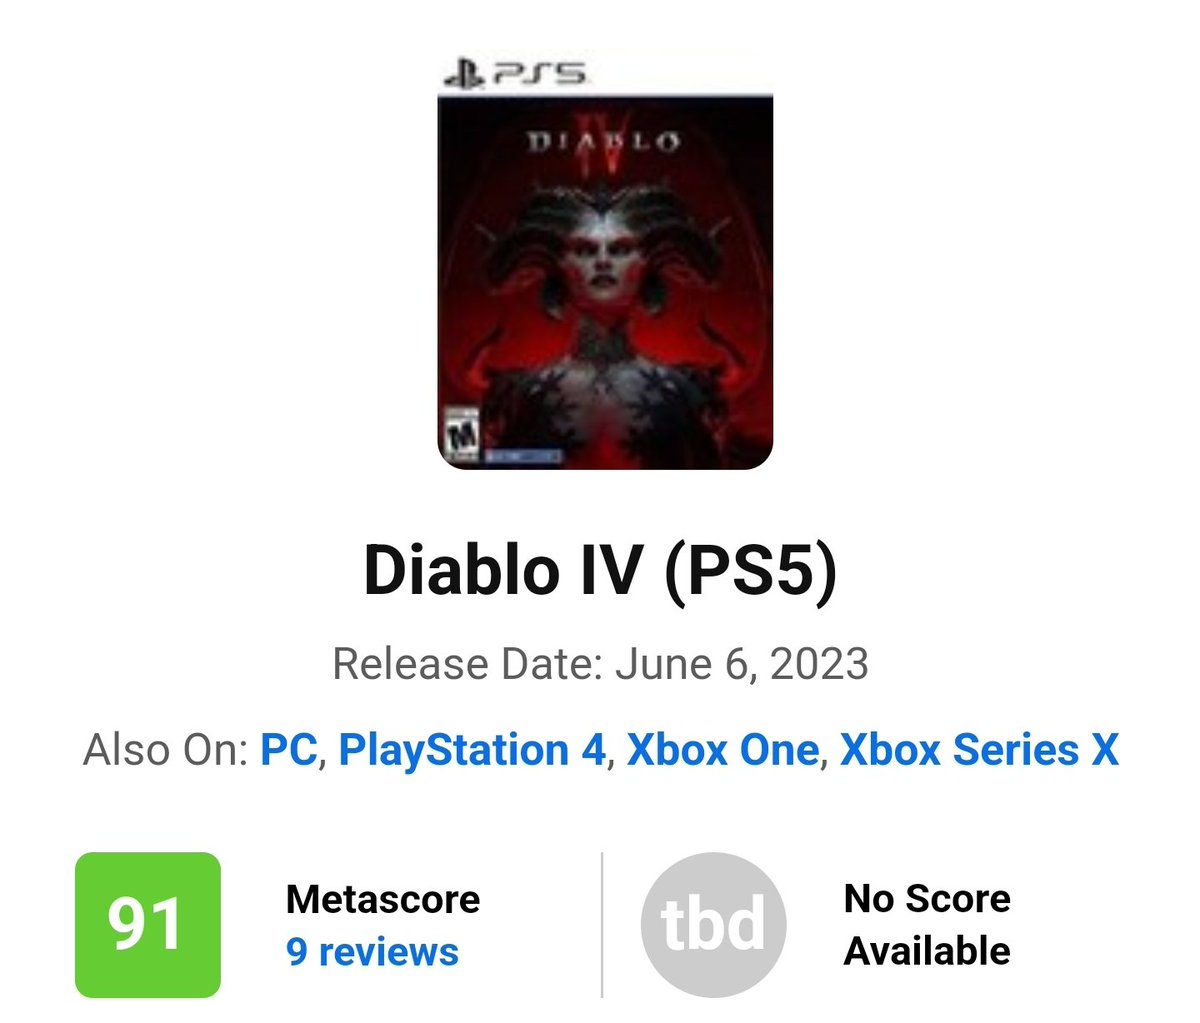 Diablo 4 Reviews are out.

VGC 5/5
IGN 9/10
Gamespot 8/10
TechRaptor 9.5/10
Wccftech 8.5/10
Press Start 9/10
Niche Gamer 9/10
WellPlayed 8.5/10
Windows Central  5/5
Push Square. 9/10

Opencritic (89):
opencritic.com/game/14353/dia…

Metacritic (PS5 91):
metacritic.com/game/playstati…